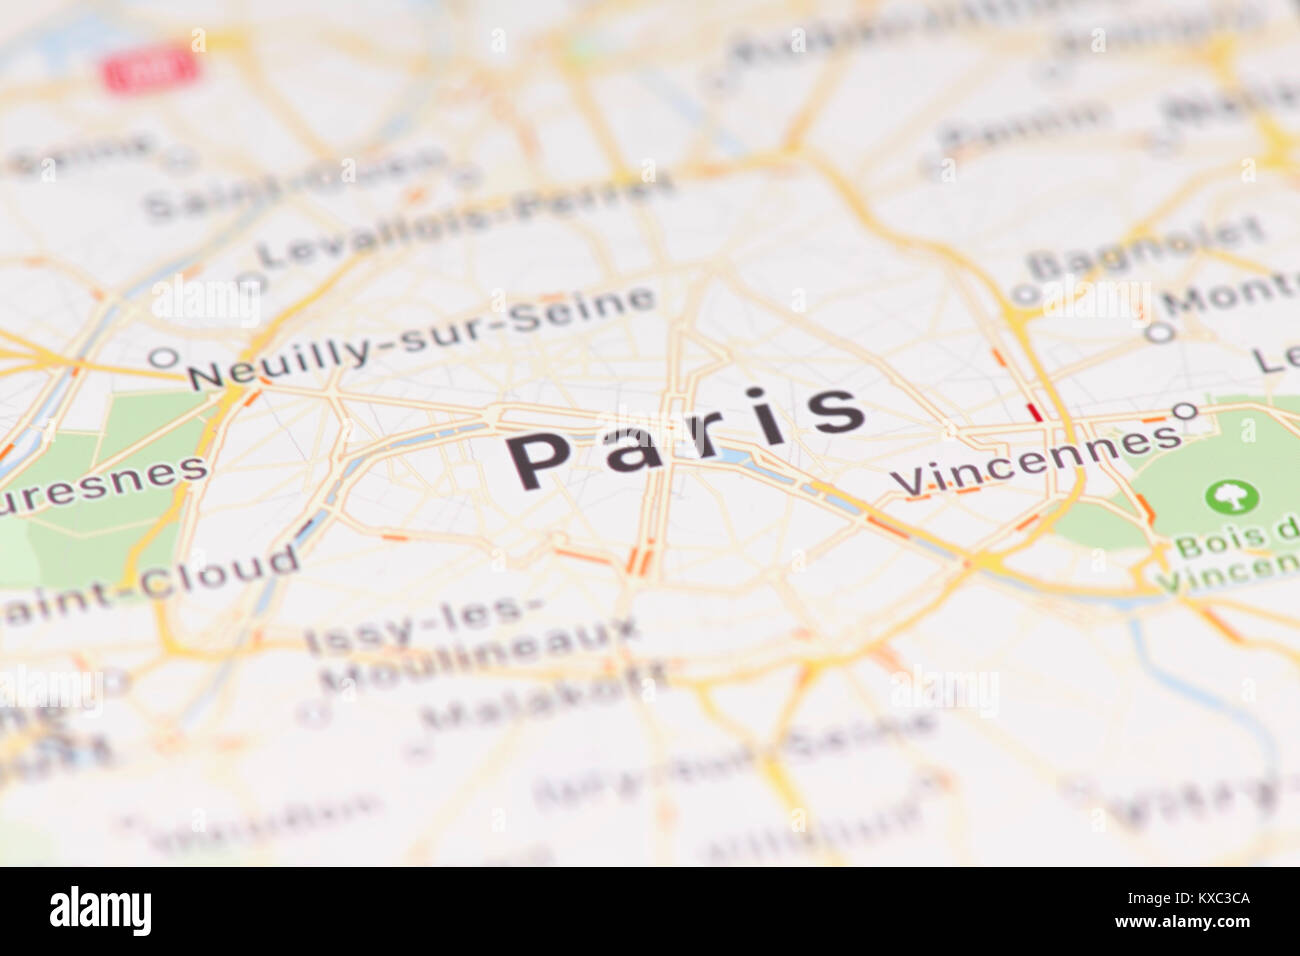 Closeup of Paris city map on the screen of a GPS device, Apple iPhone maps app Stock Photo